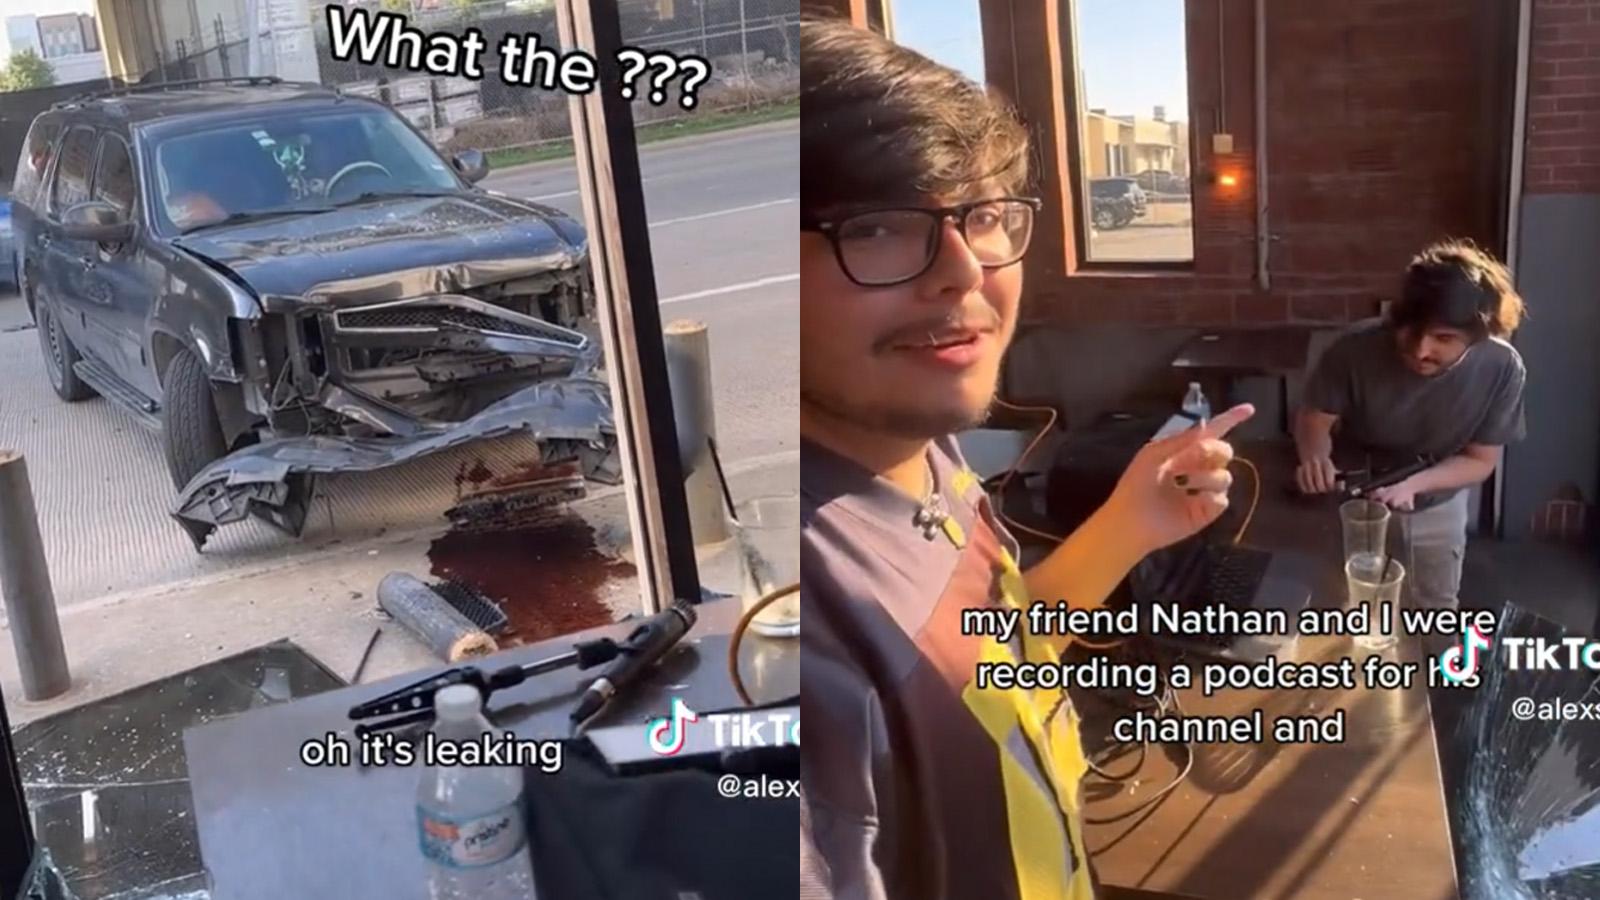 TikToker shocks viewers by revealing they were hit by a car